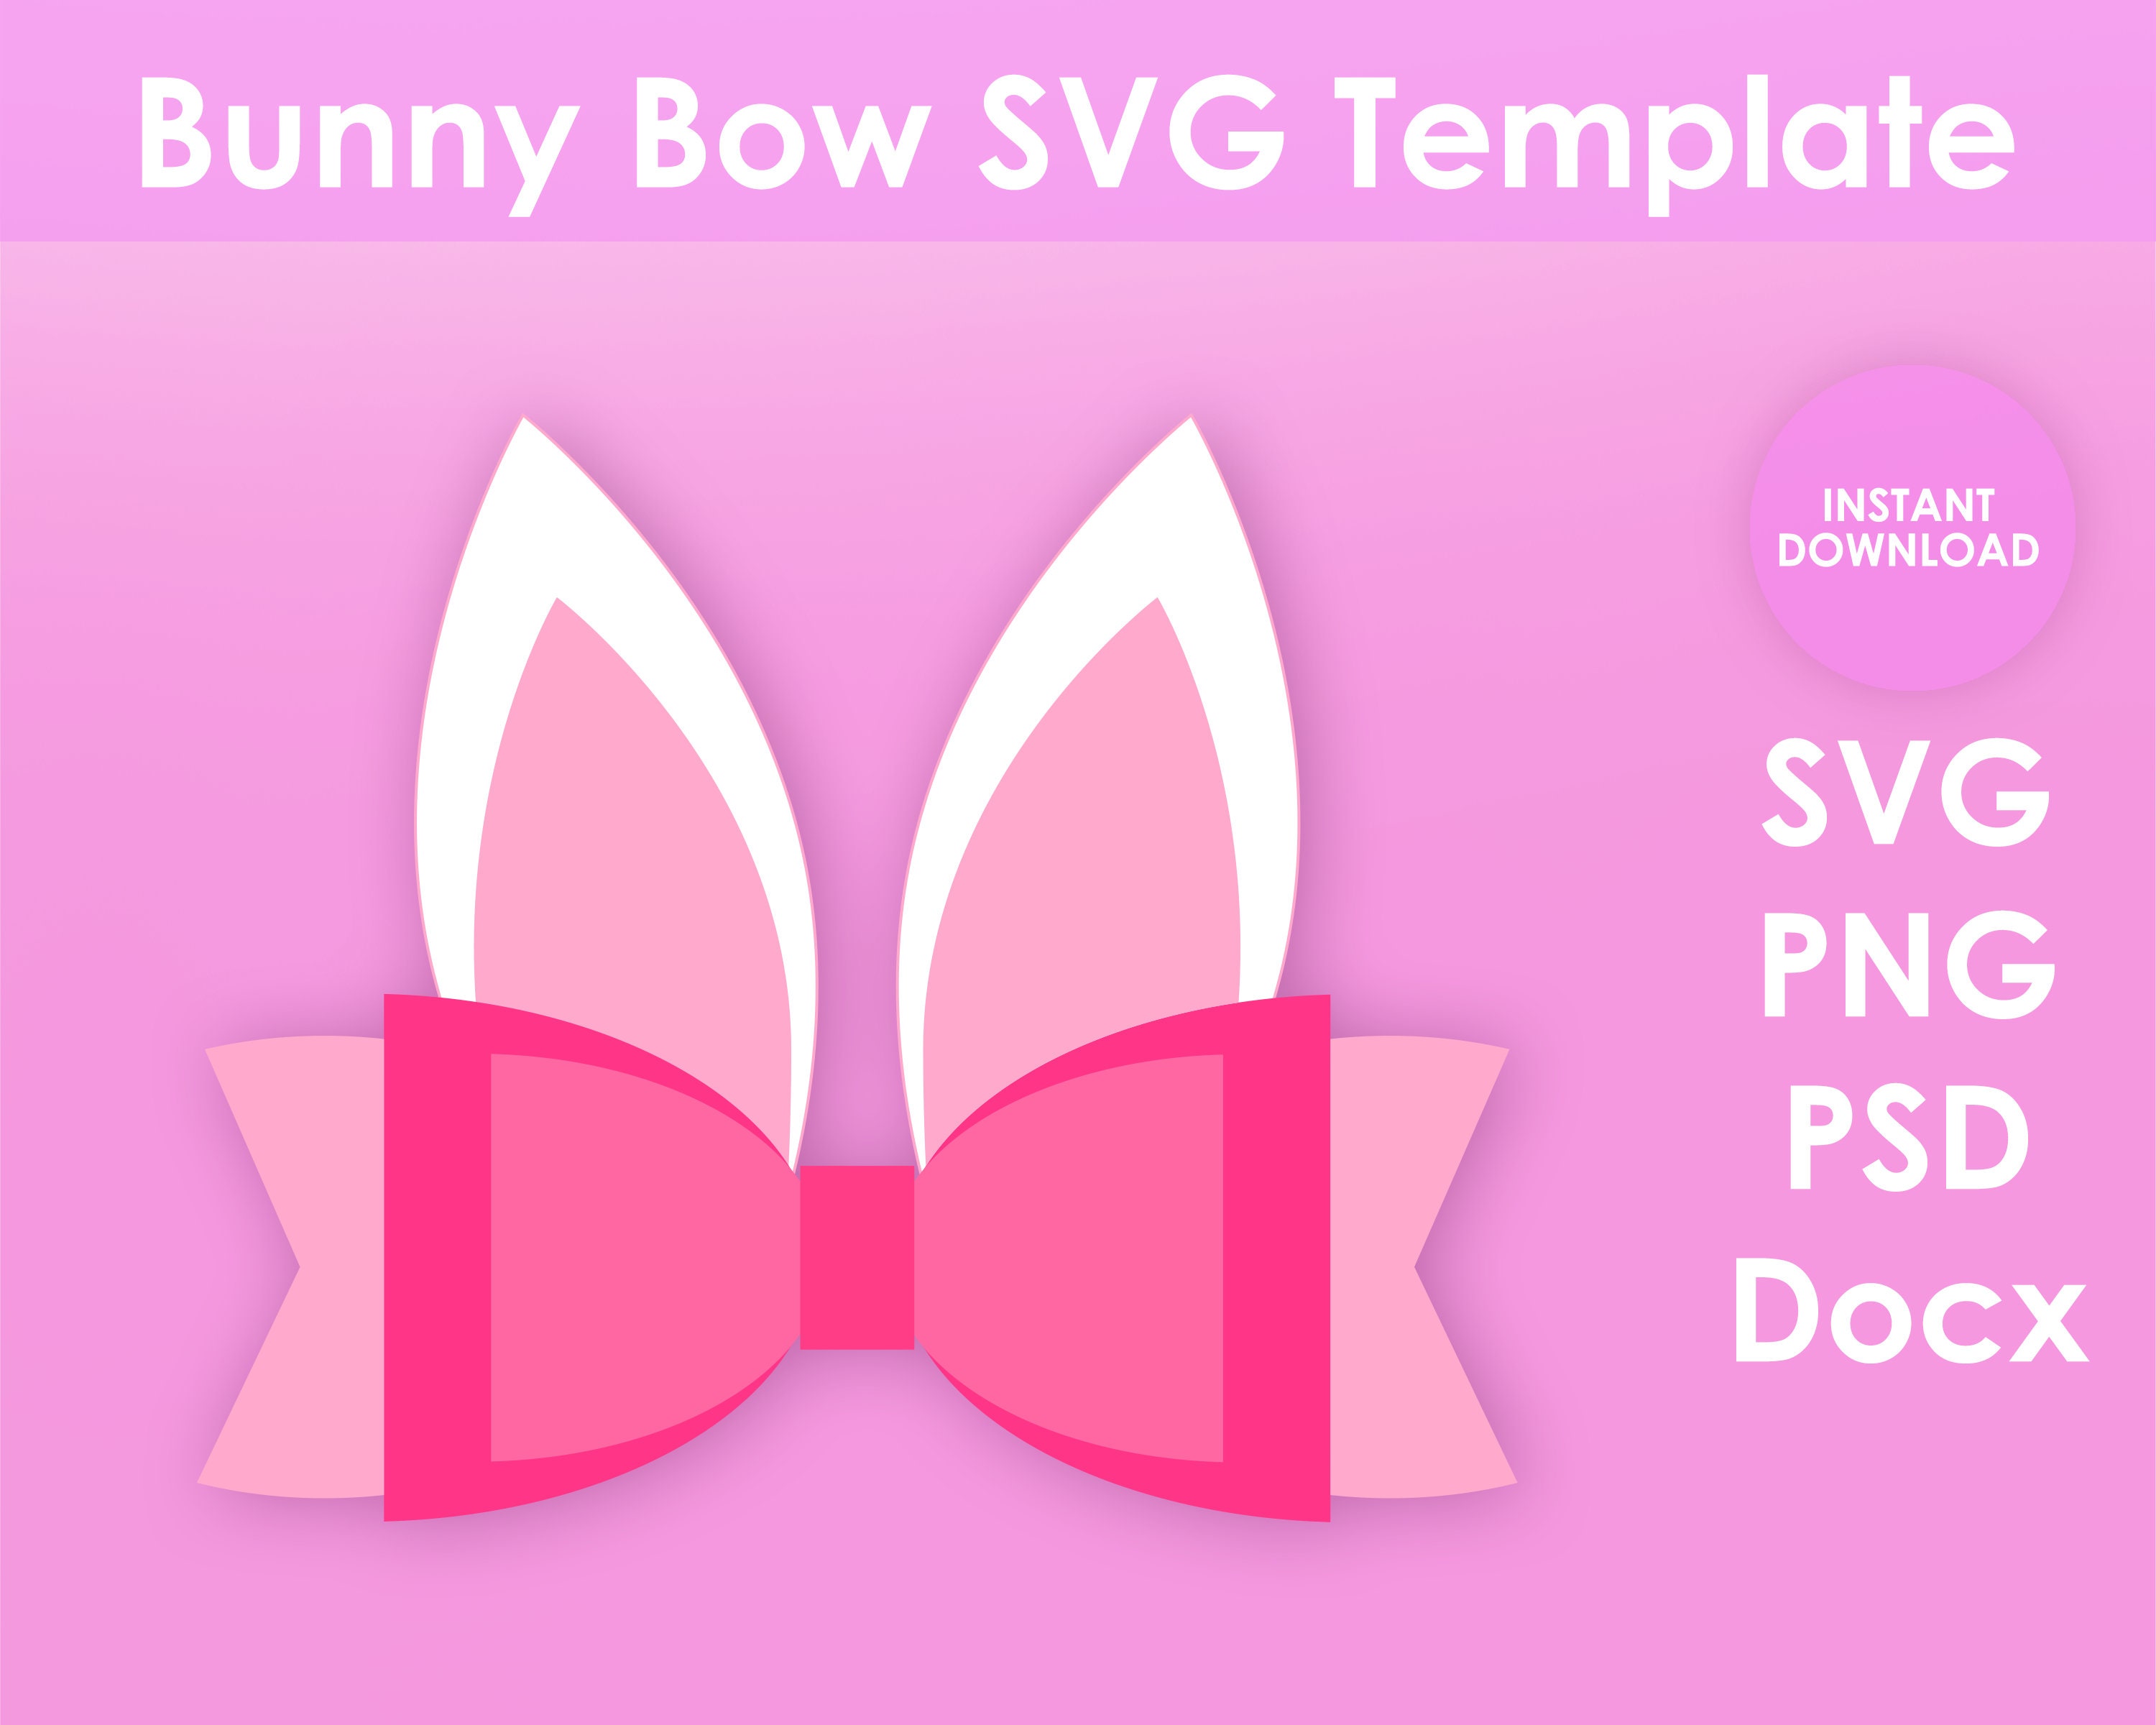 Easter Bunny Bow Template SVG PNG PSD and Docx 8.5x11 Sheet - Etsy UK